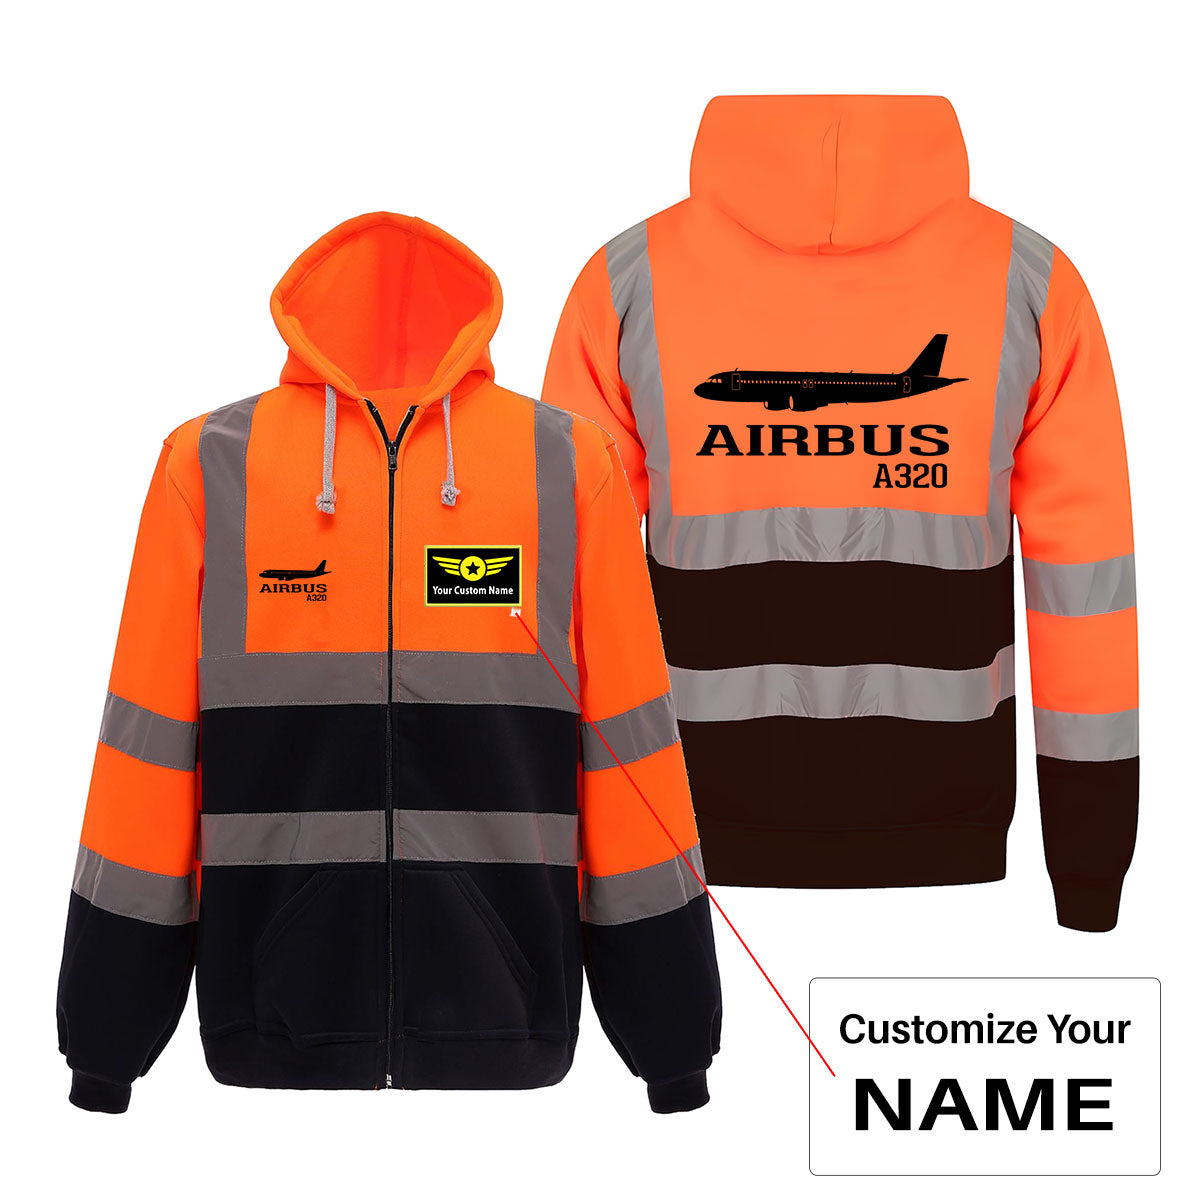 Airbus A320 Printed Designed Reflective Zipped Hoodies